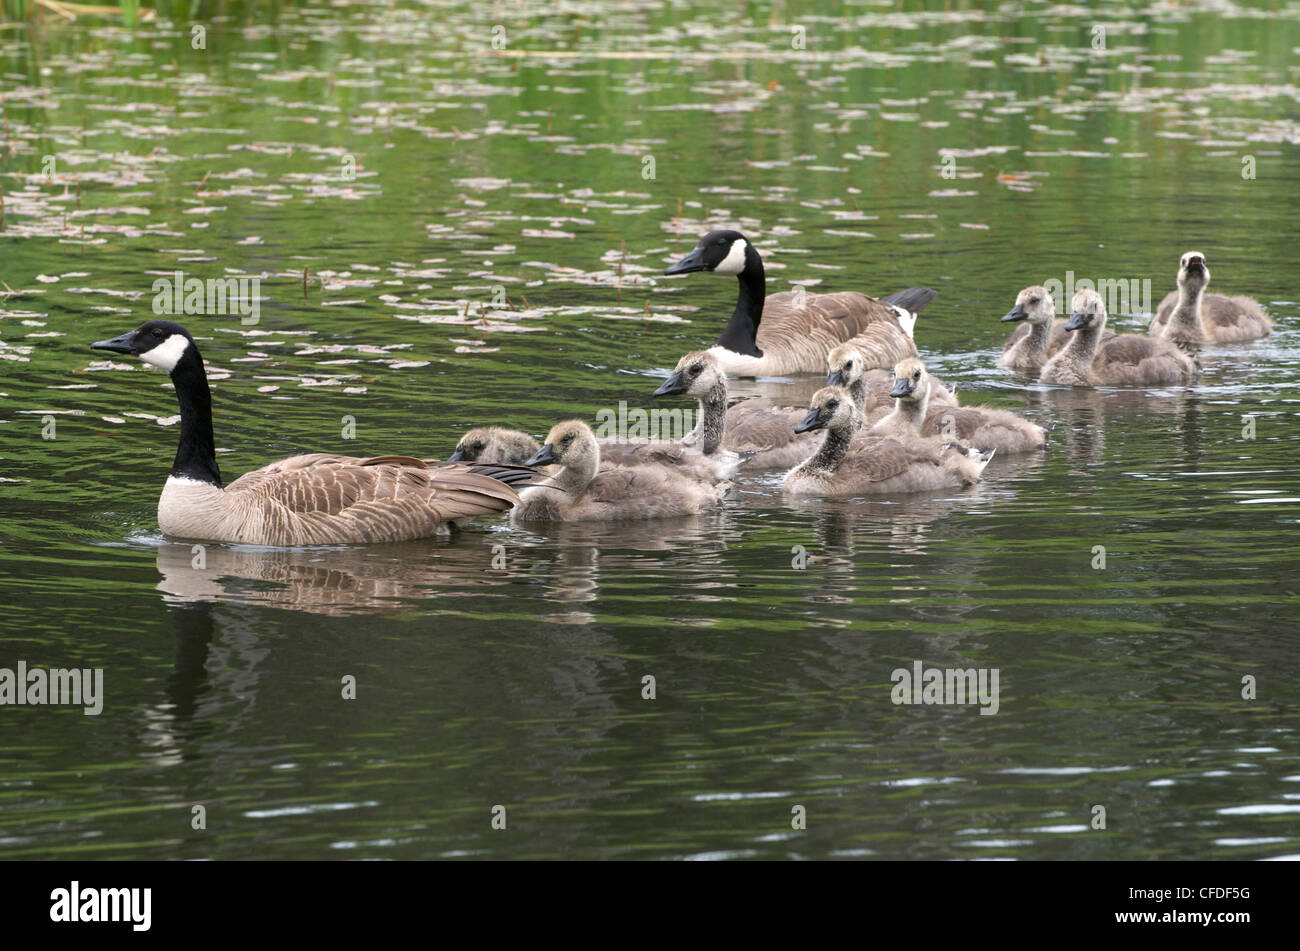 CanadGoose parent young goslings swimming pond Stock Photo